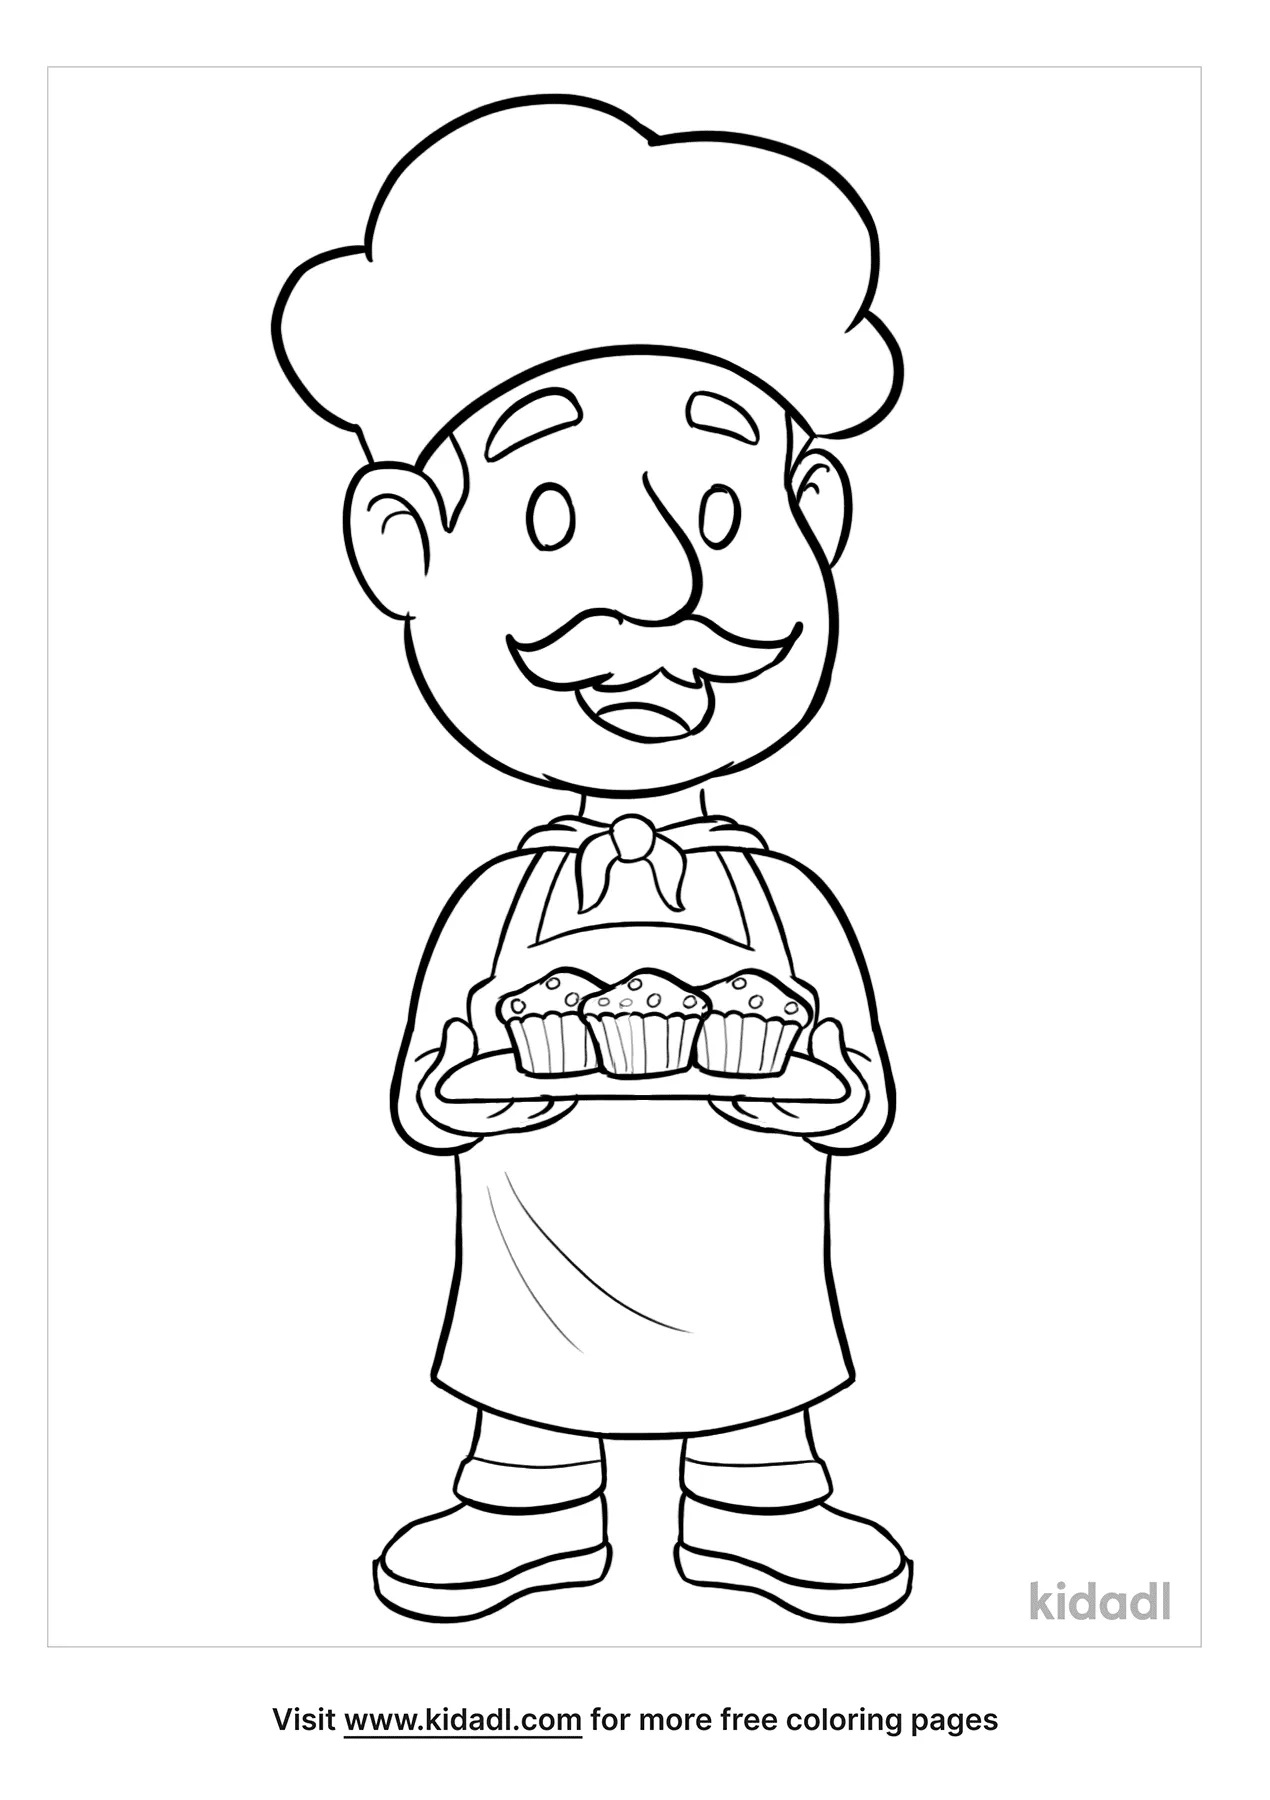 The Muffin Man Coloring Page